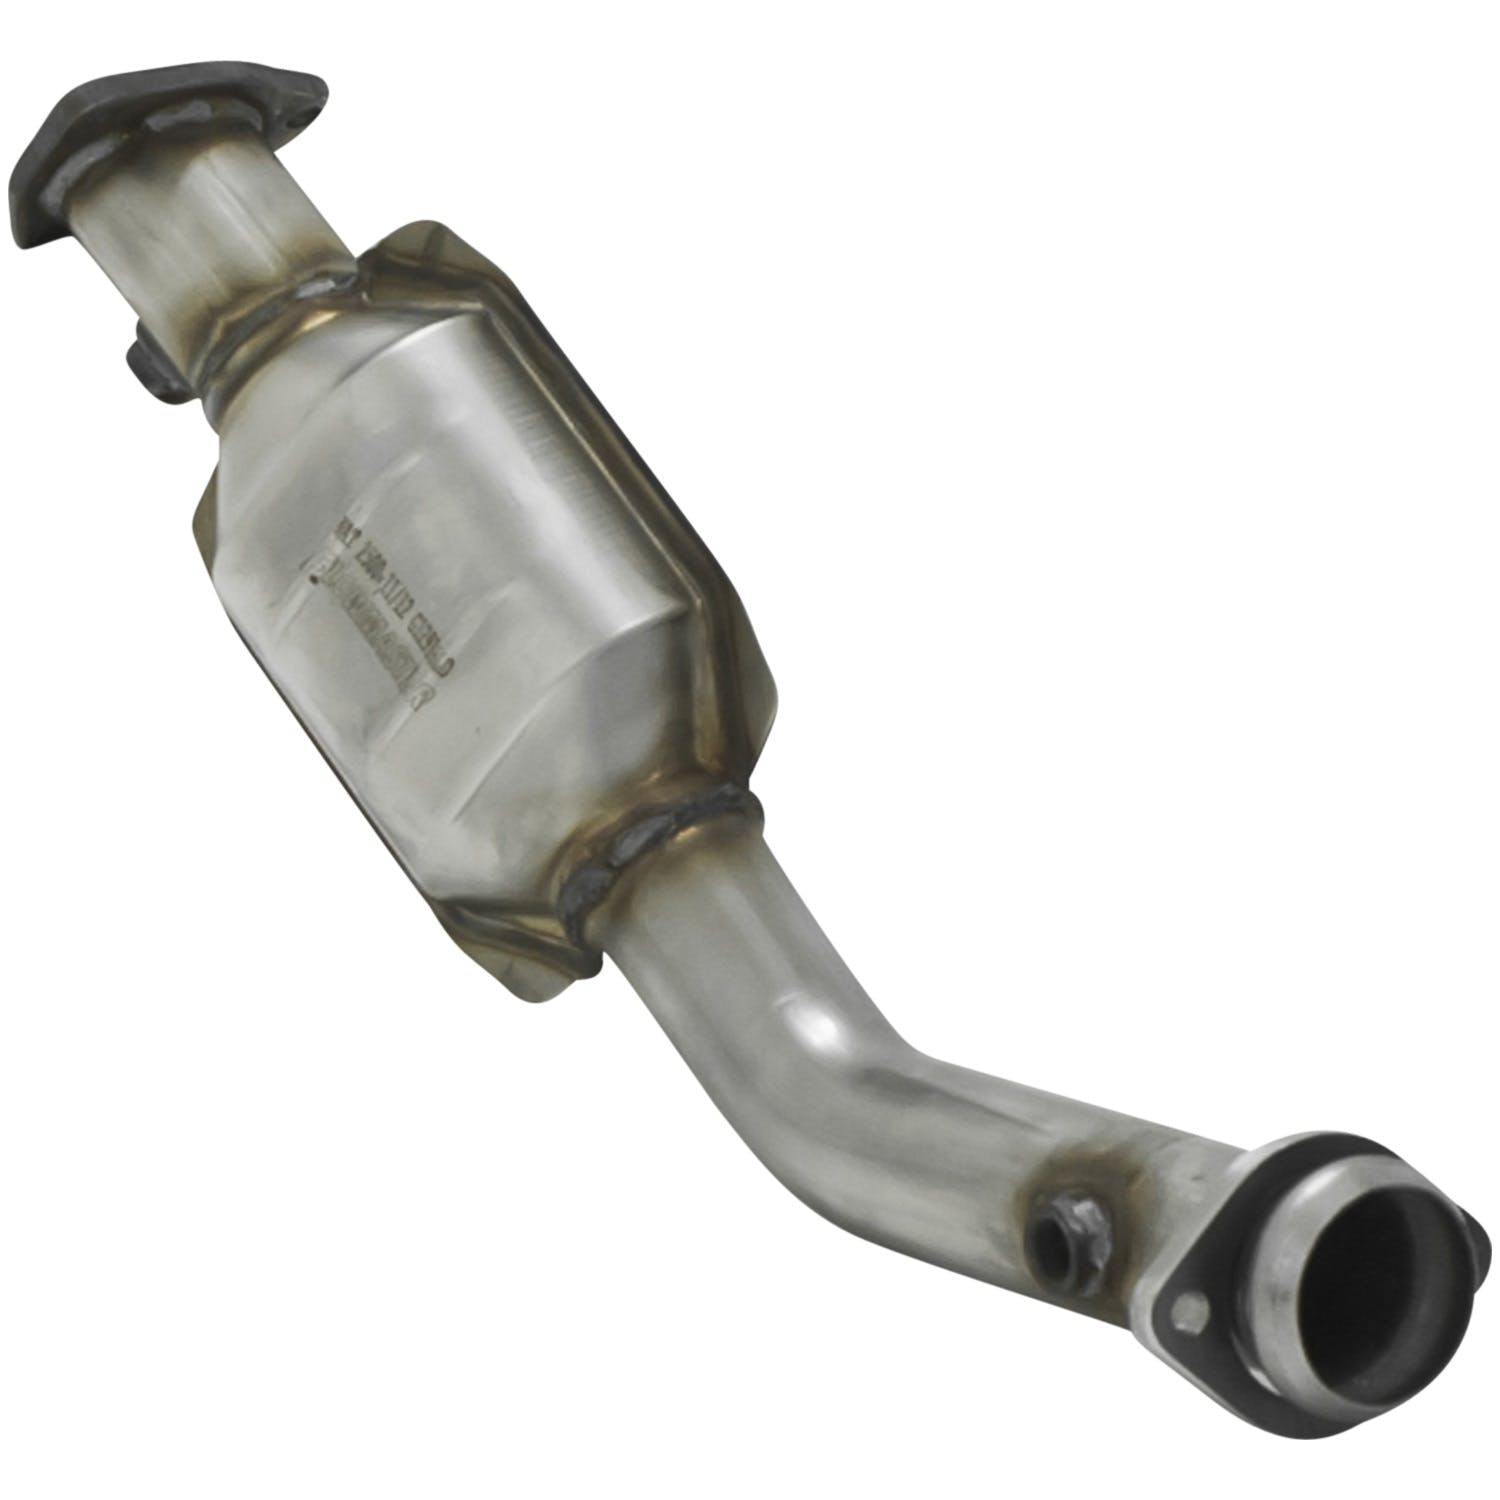 Flowmaster Catalytic Converters 2010009 Catalytic Converter-Direct Fit-2.25 in. Inlet/Outlet-Right-49 State